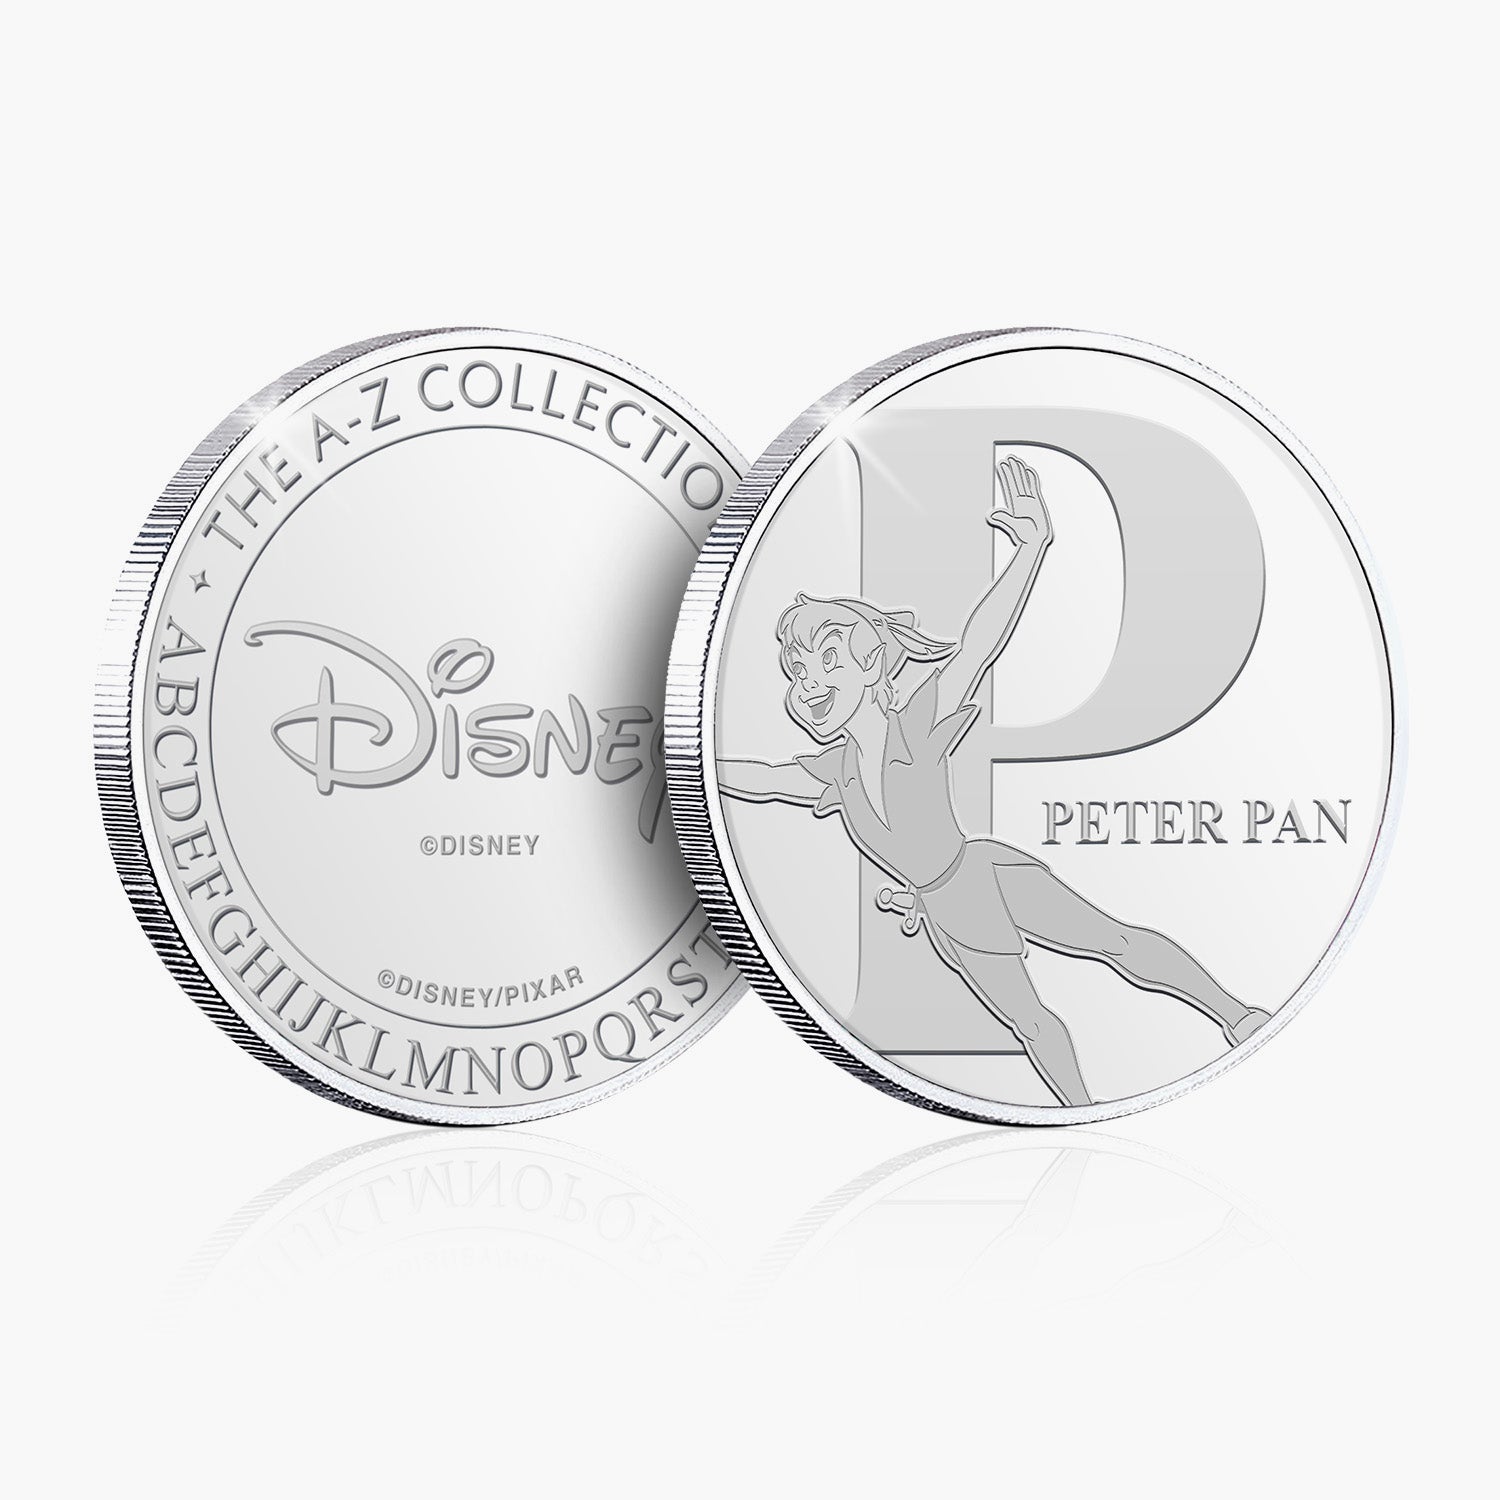 P Is For Peter Pan Silver-Plated Commemorative